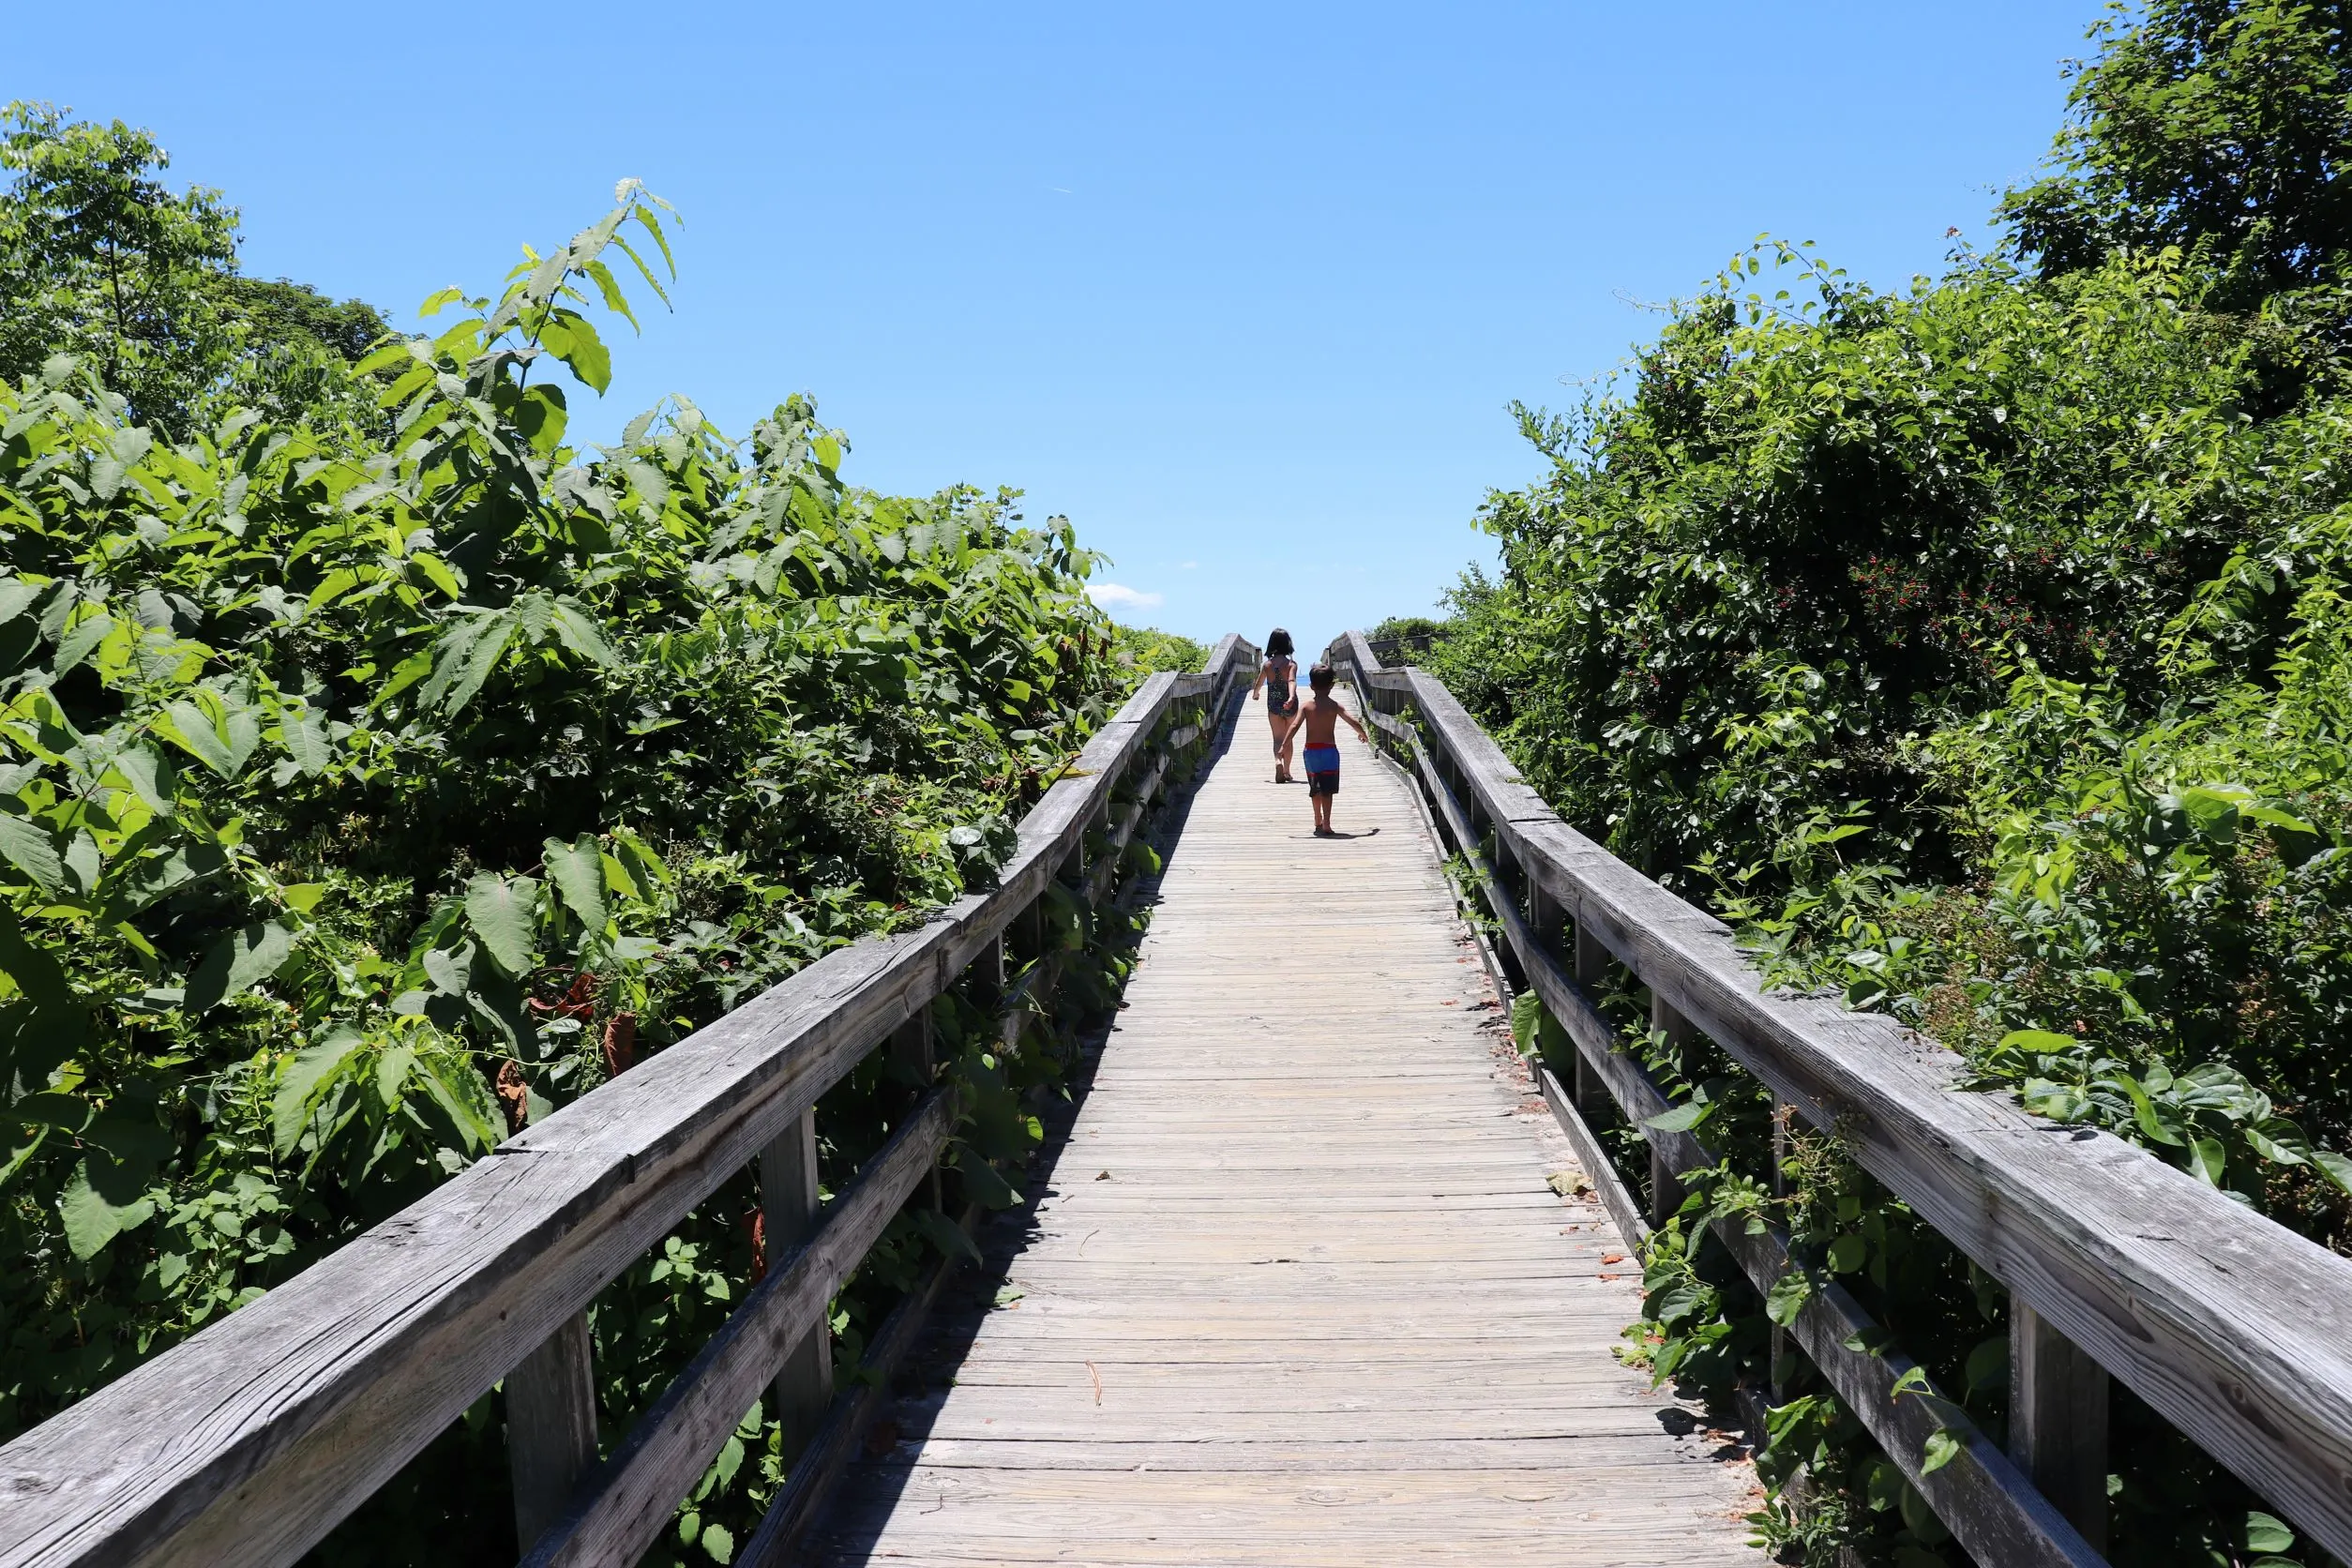 Image of 2 kids walking down boardwalk at Harkness Park in Waterford Connecticut.